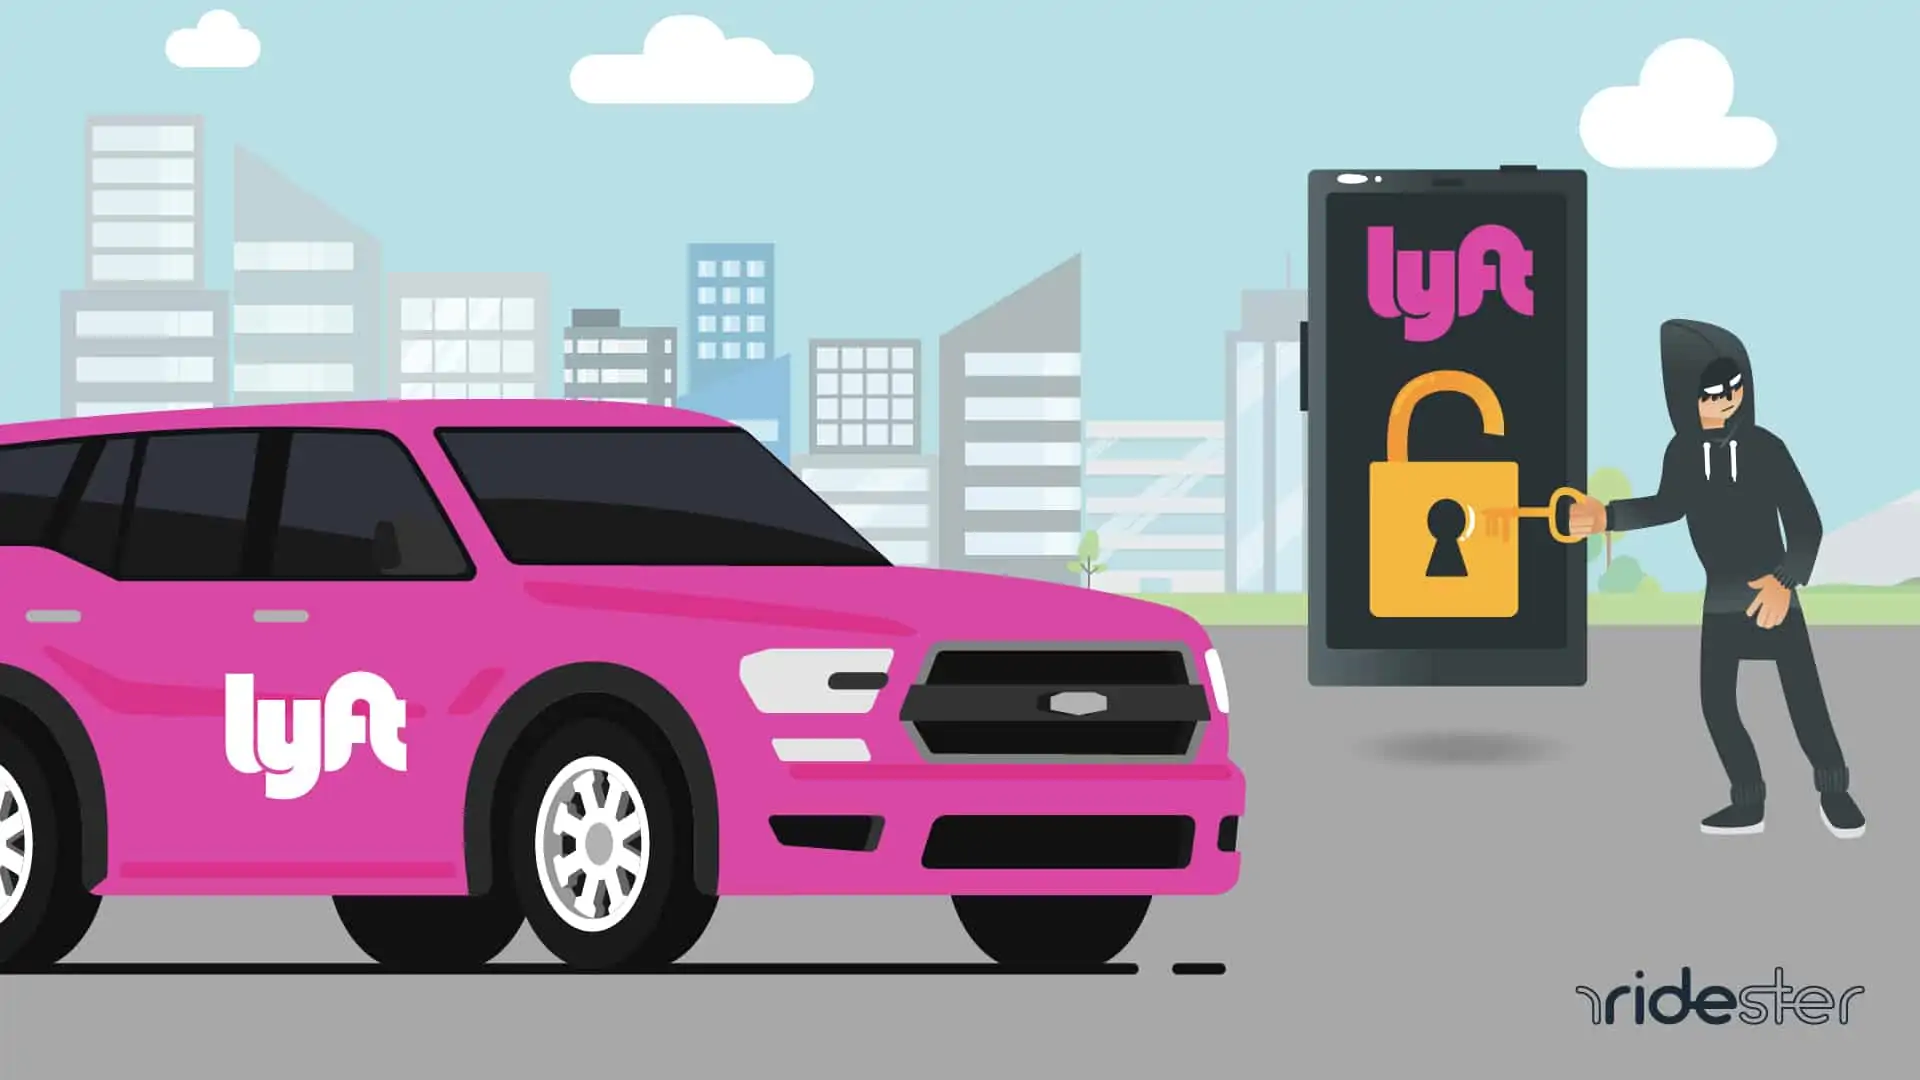 vector graphic showing a lyft vehicle in the foreground and in the background a guy implementing a Lyft free ride hack on a mobile phone running the Lyft app